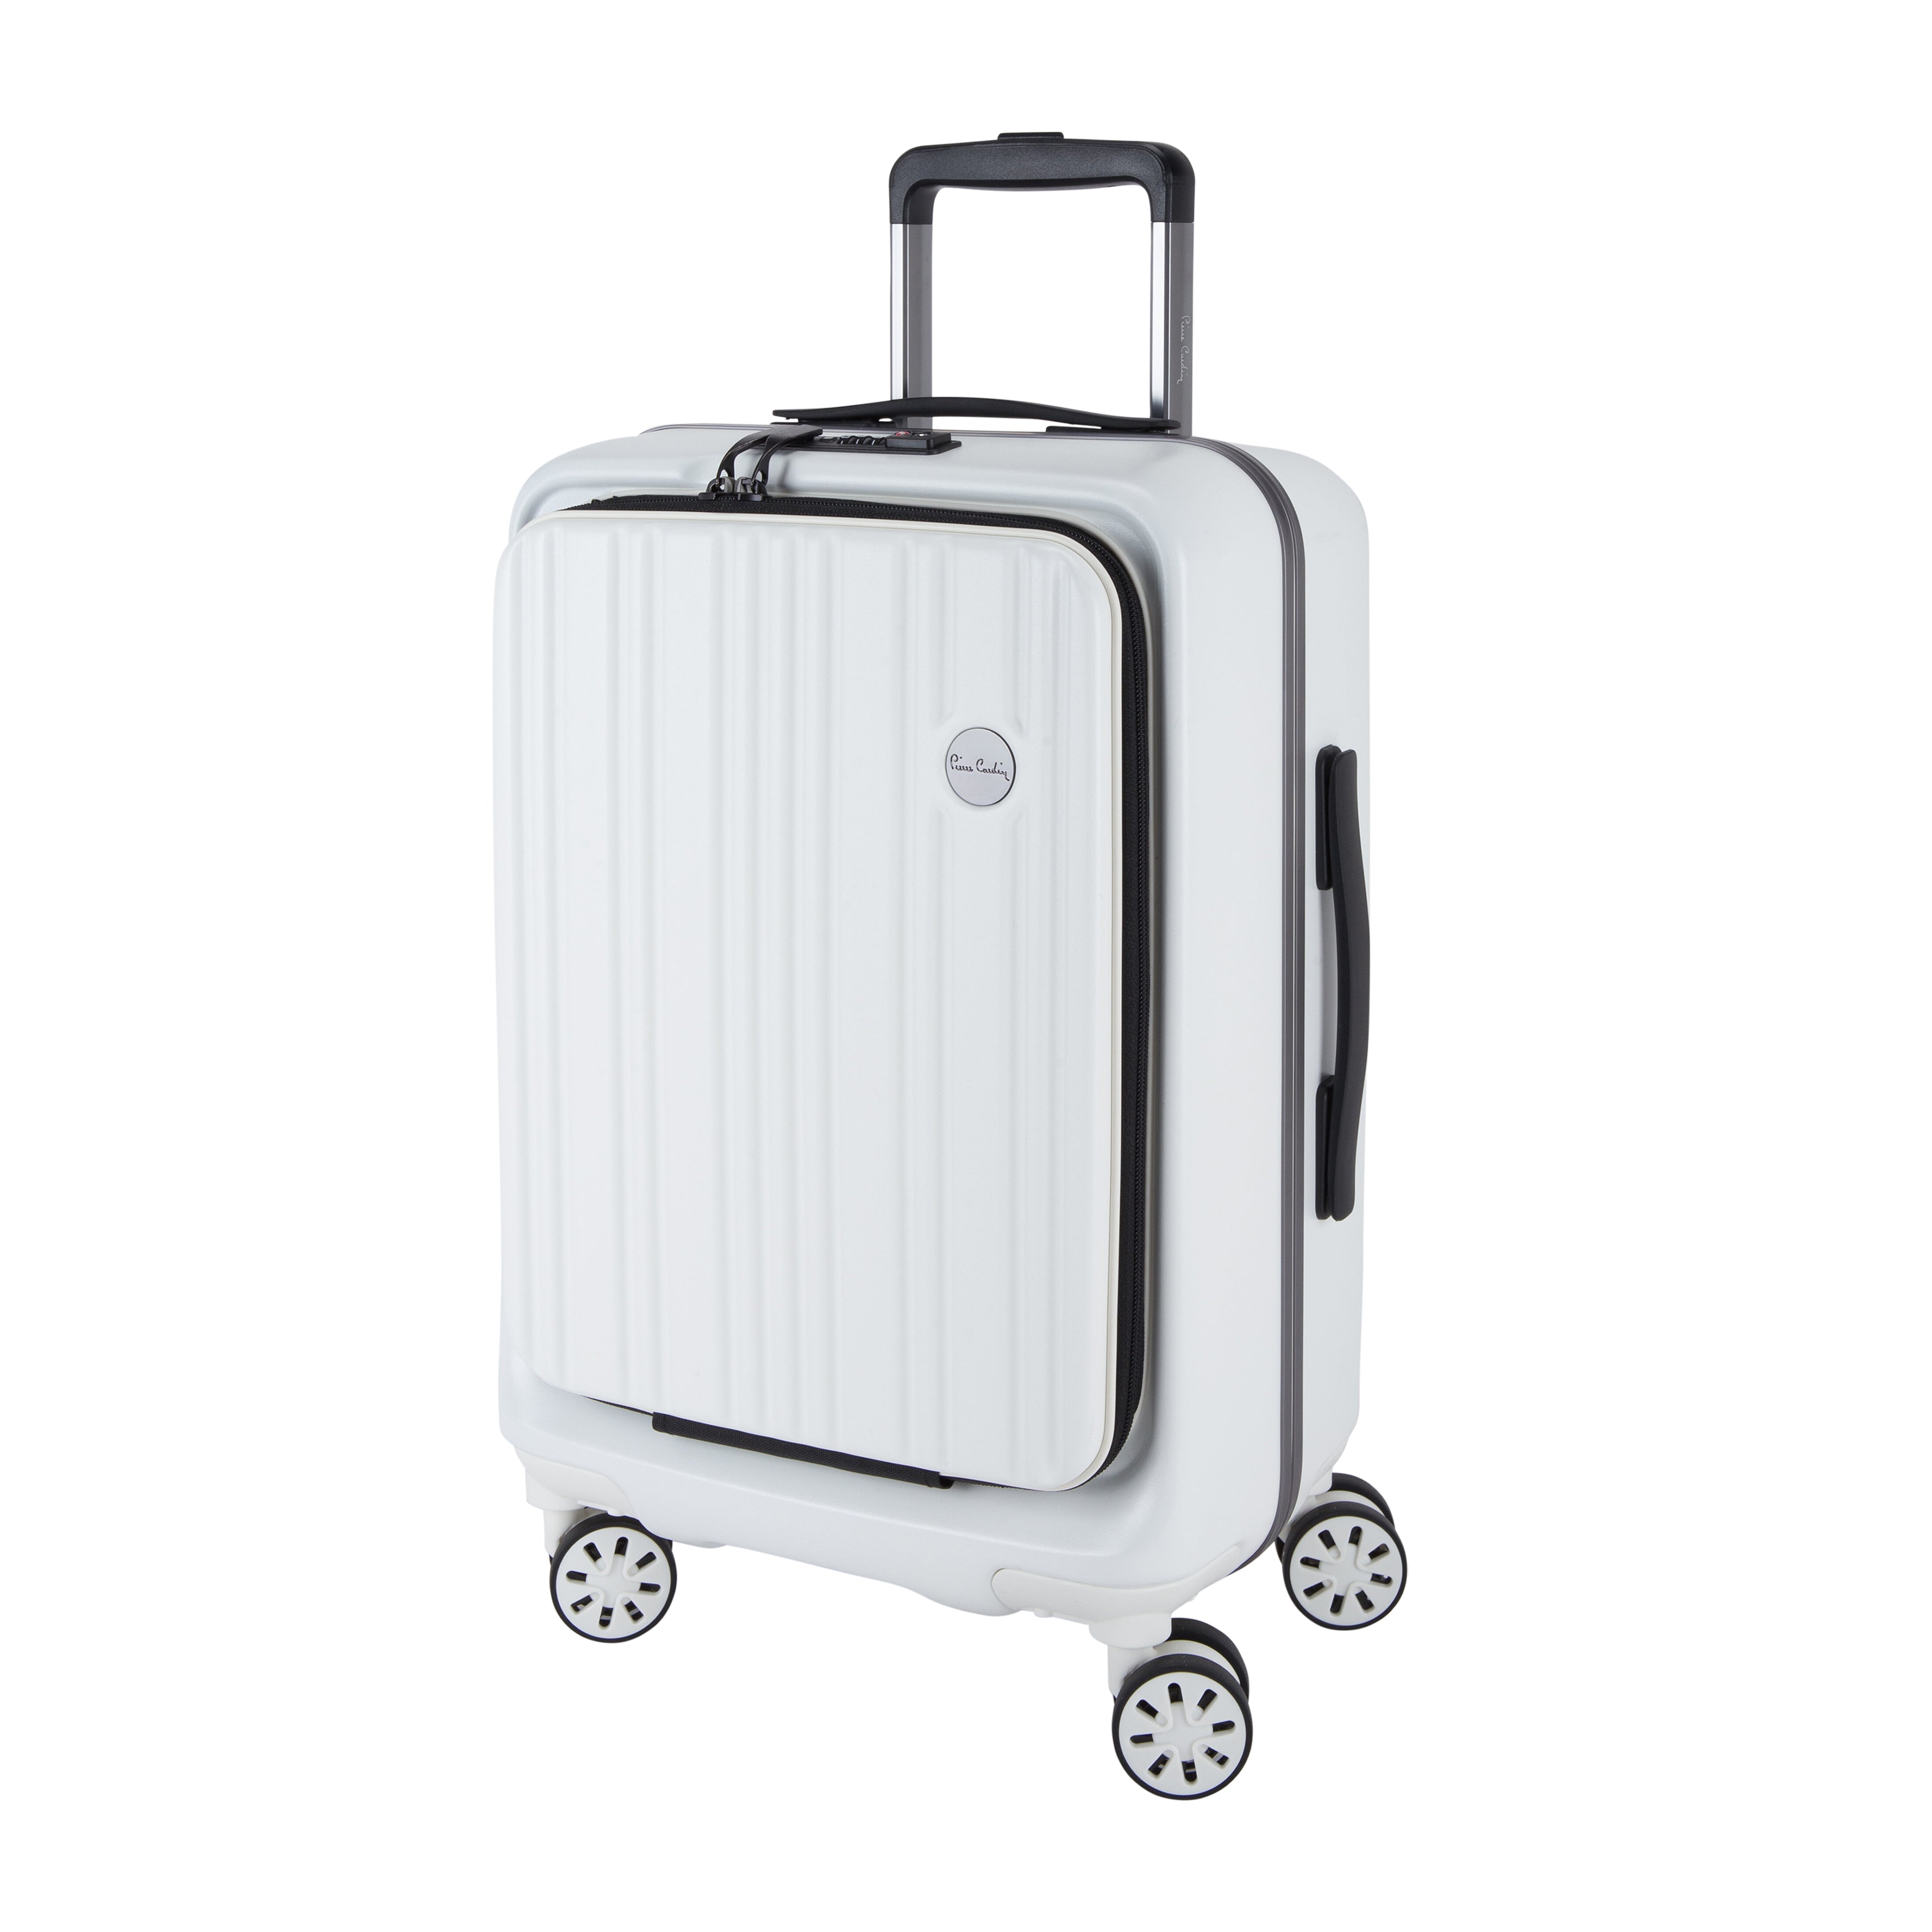 Pierre Cardin Suitcase Front Pocket Design Carry On, White